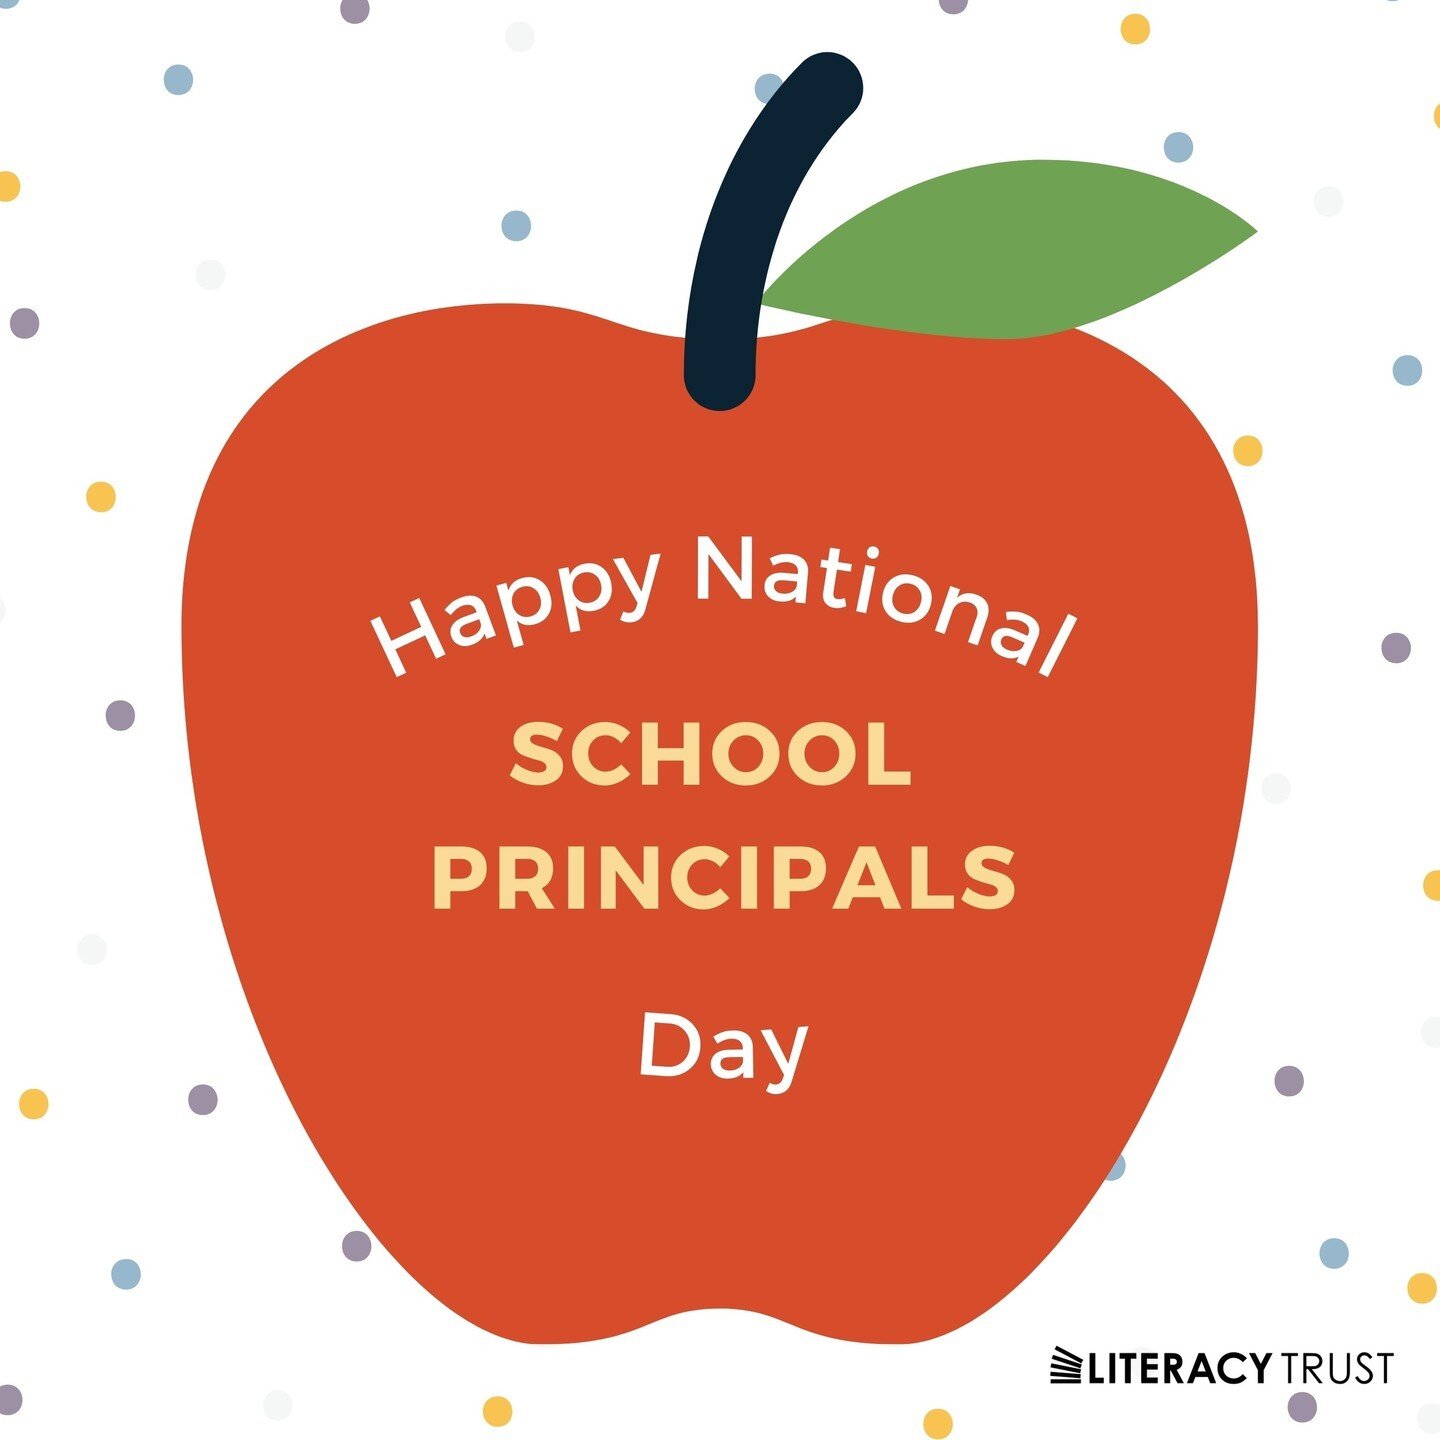 Today we honor the amazing school principals who are leading our school communities &amp; future leaders into brighter futures. Thank you for all that you do! #NationalSchoolPrincipalsDay #ThankYou #MondayShoutOut